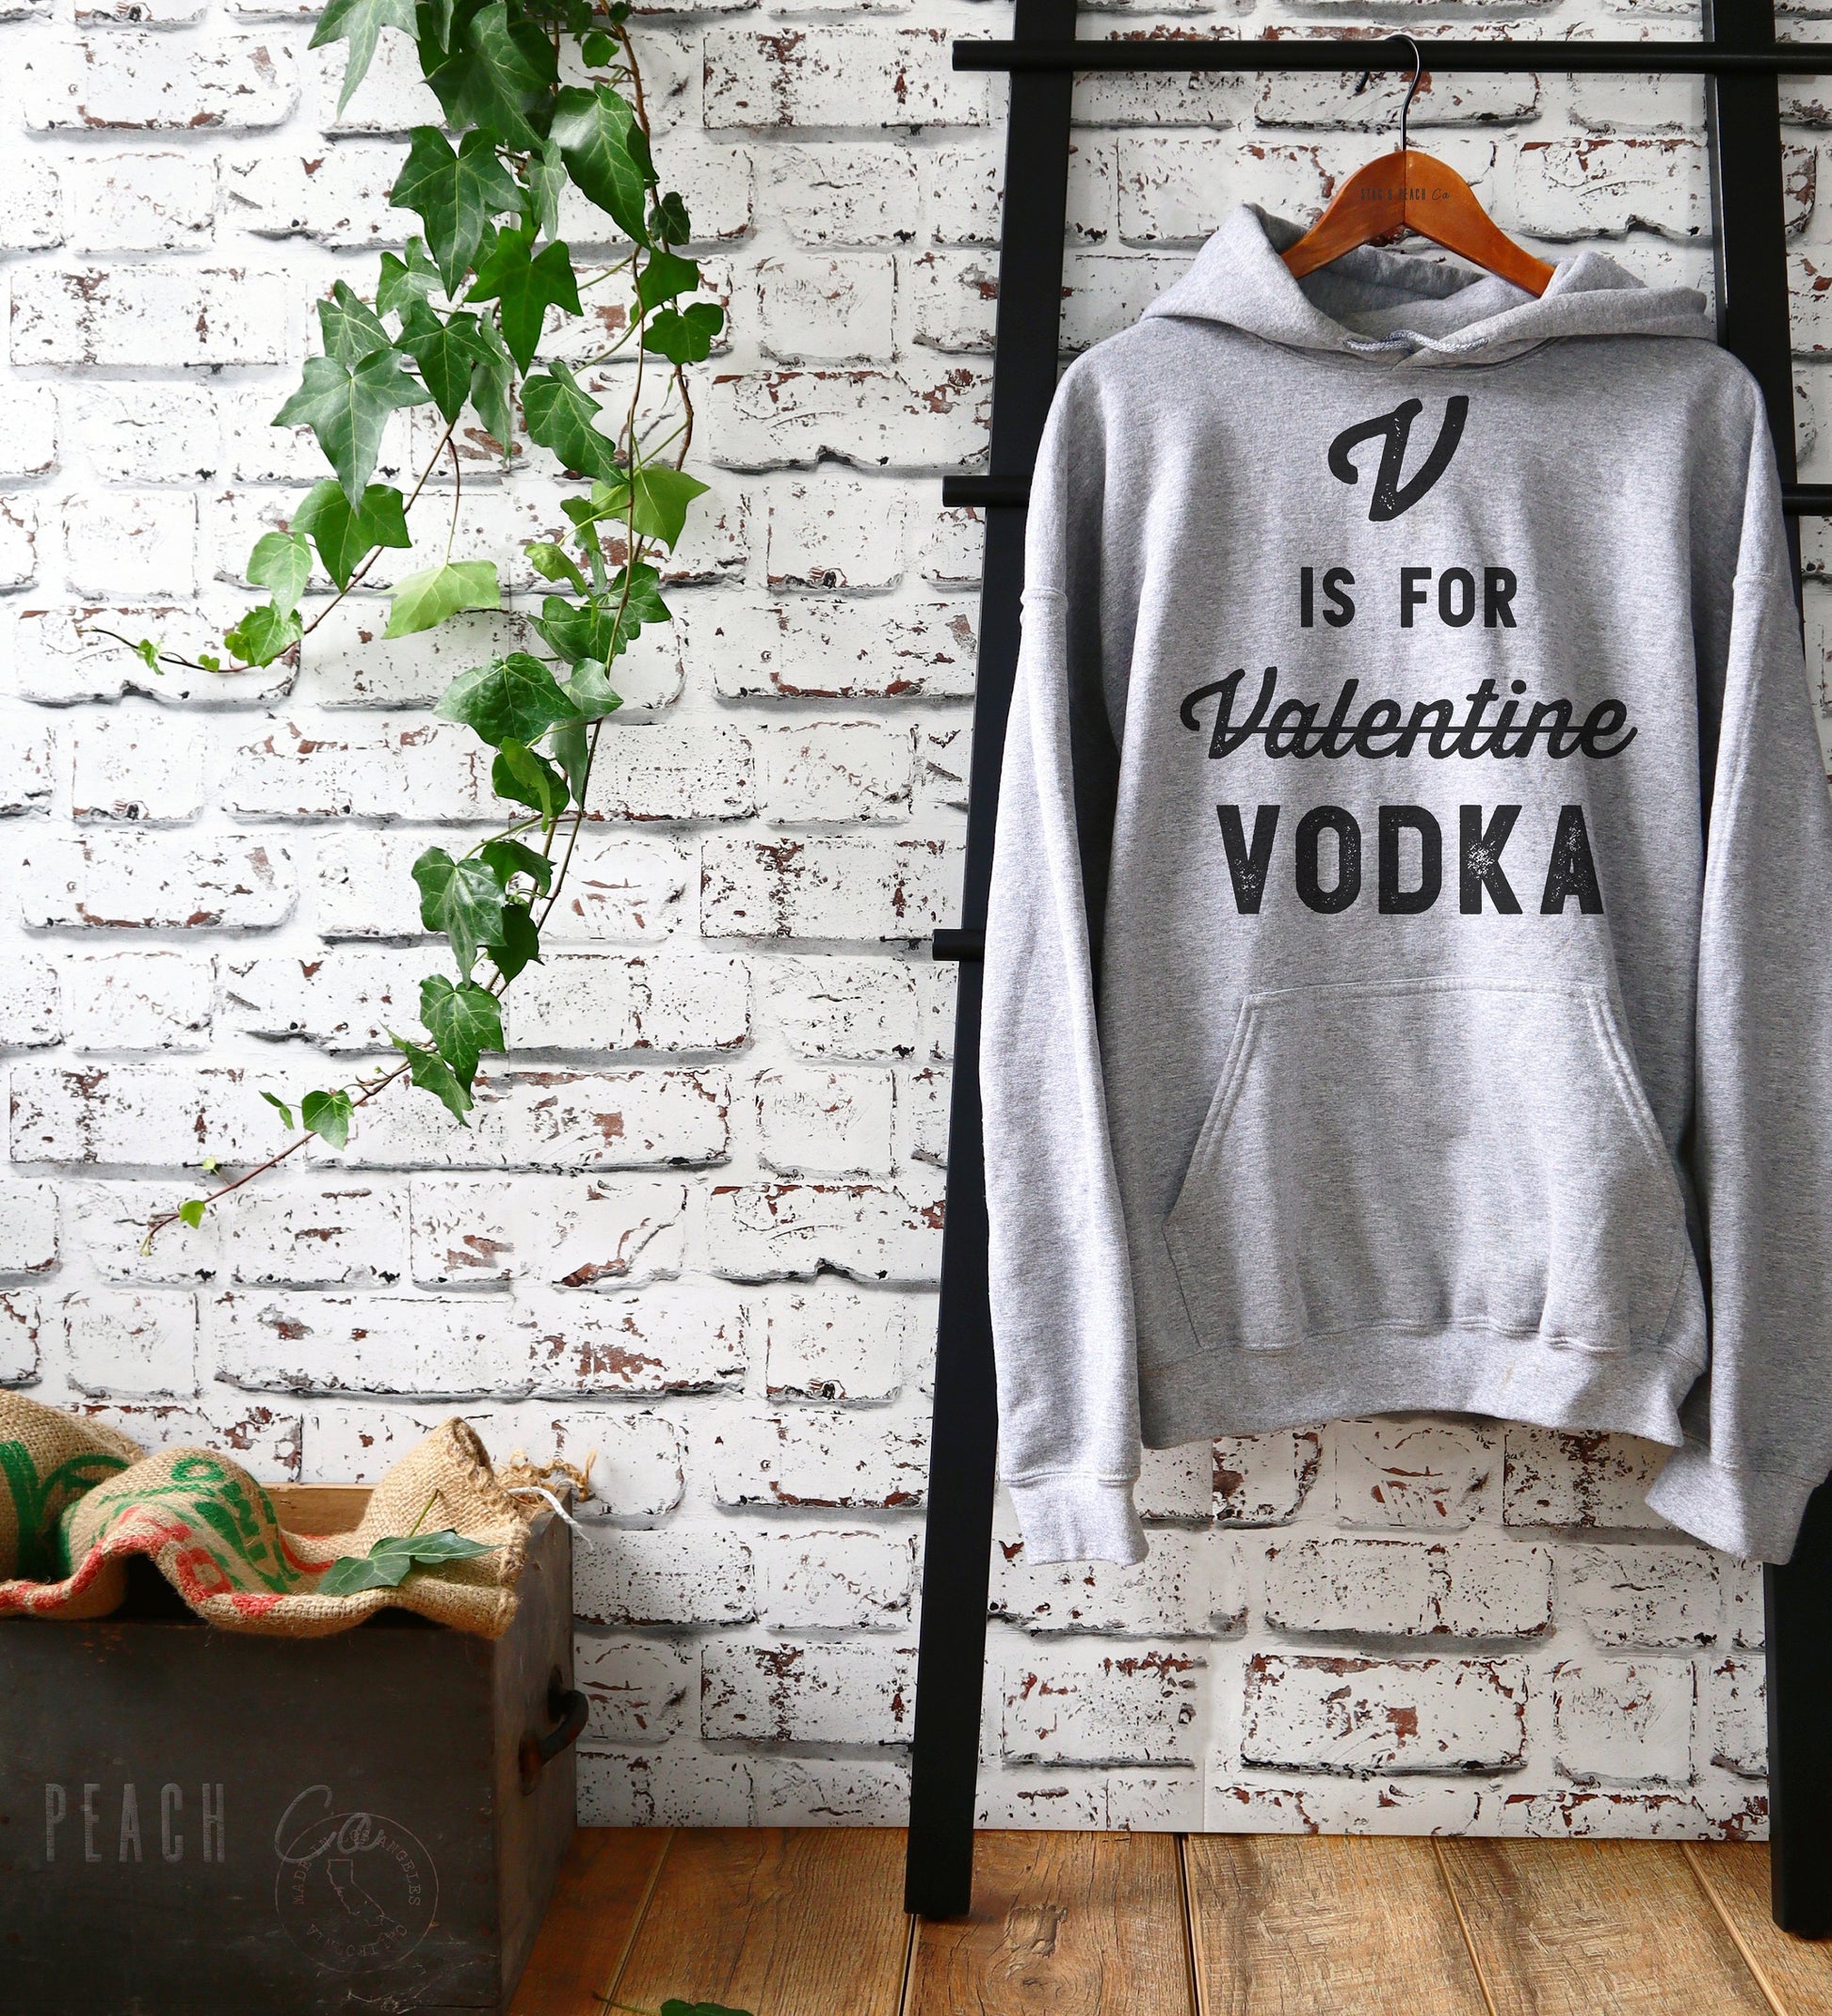 V Is for Vodka Funny Valentine's Day Graphic Tee